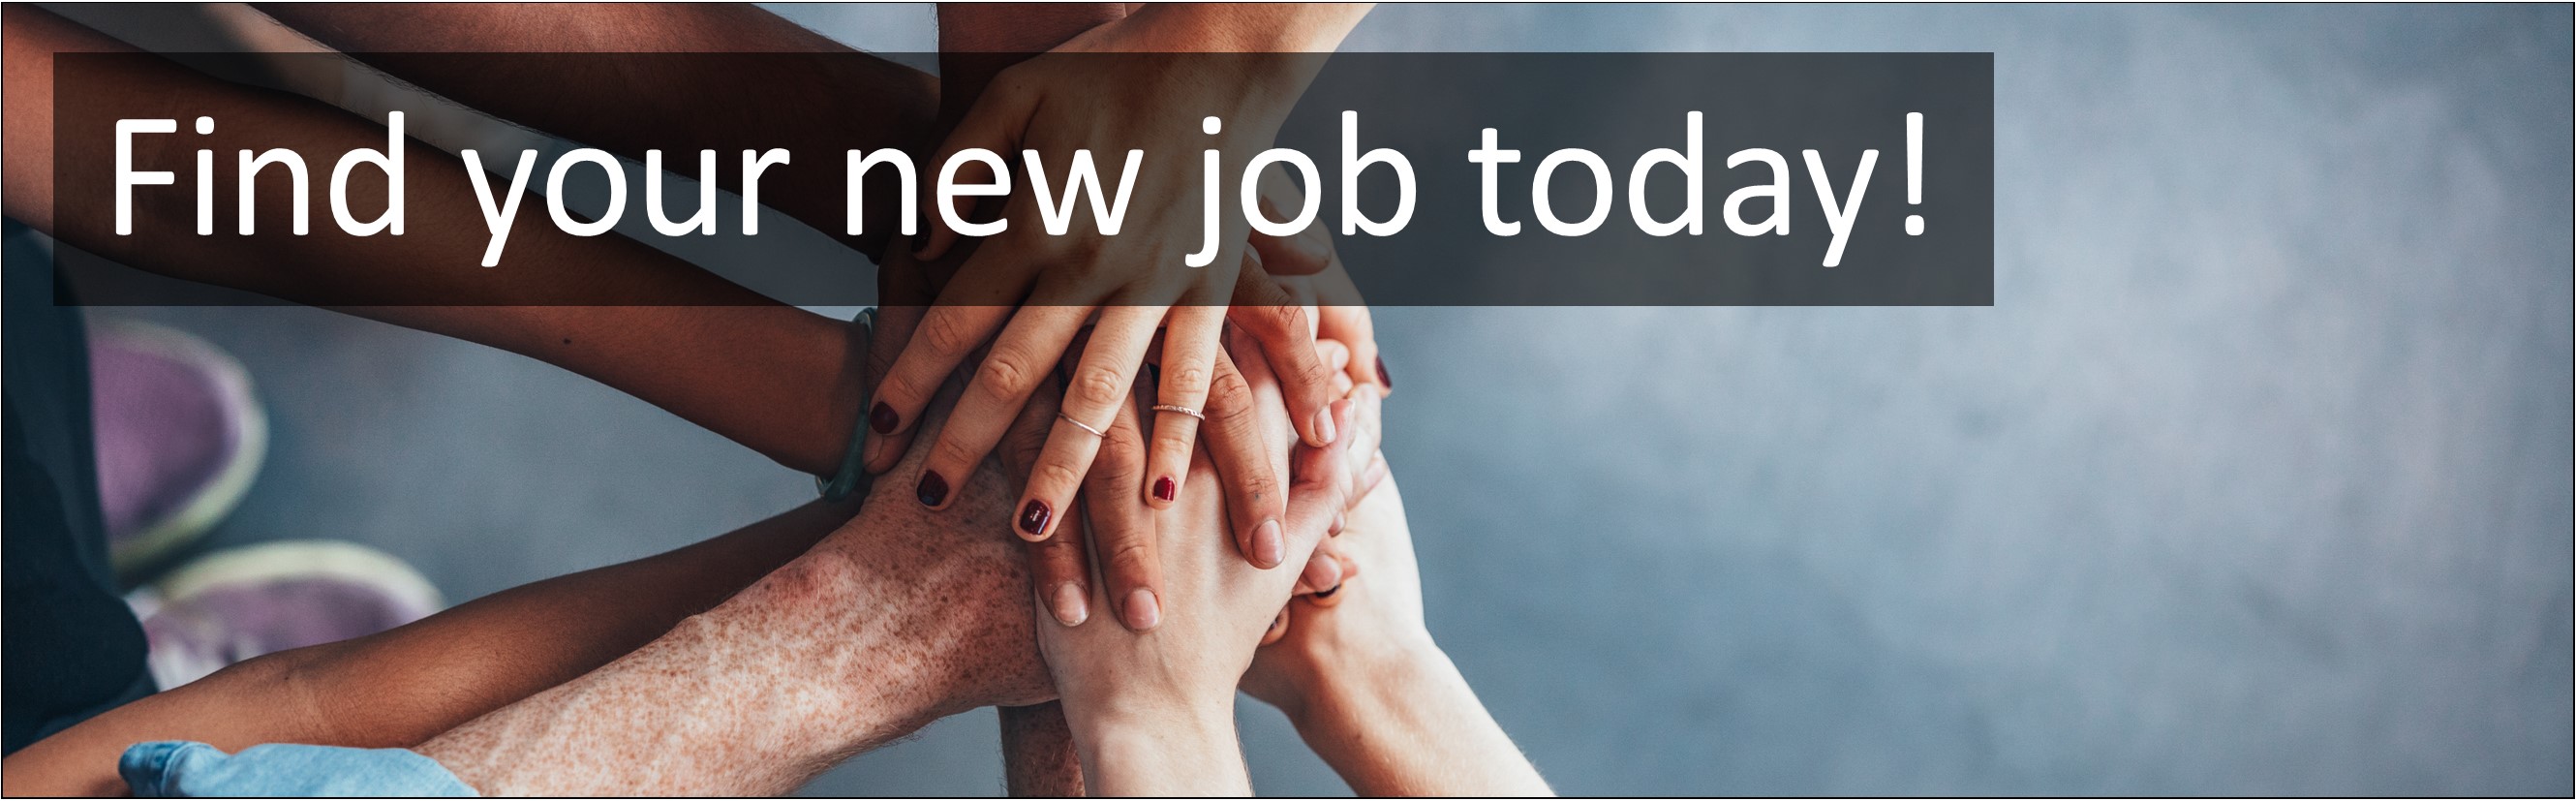 Social Care Jobs. Recovery Worker / Drug and Alcohol Support Jobs, Careers & Vacancies in High Wycombe, Buckinghamshire Advertised by AWD online – Multi-Job Board Advertising and CV Sourcing Recruitment Services